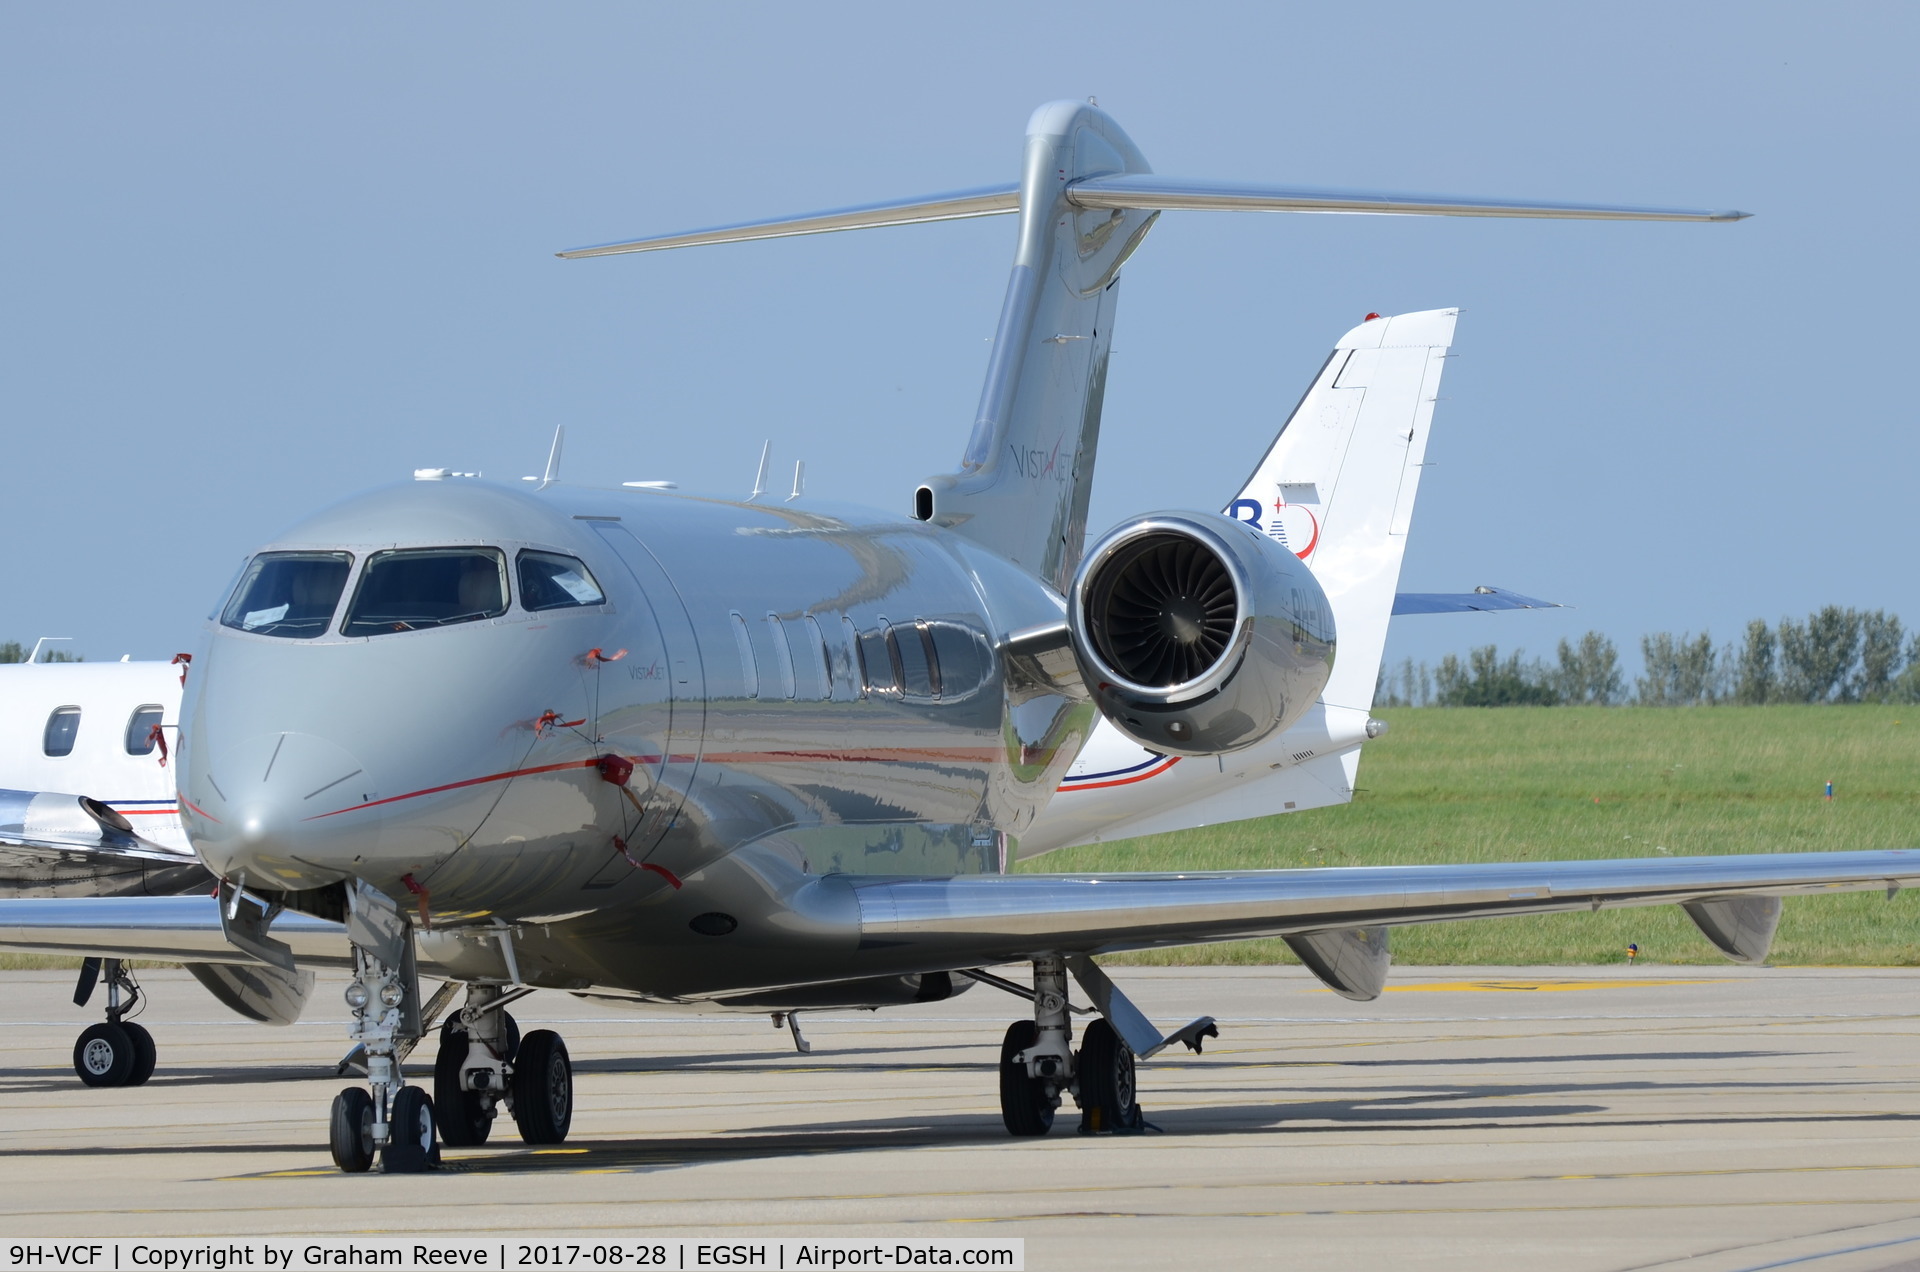 9H-VCF, 2014 Bombardier Challenger 350 (BD-100-1A10) C/N 20541, Parked at Norwich.